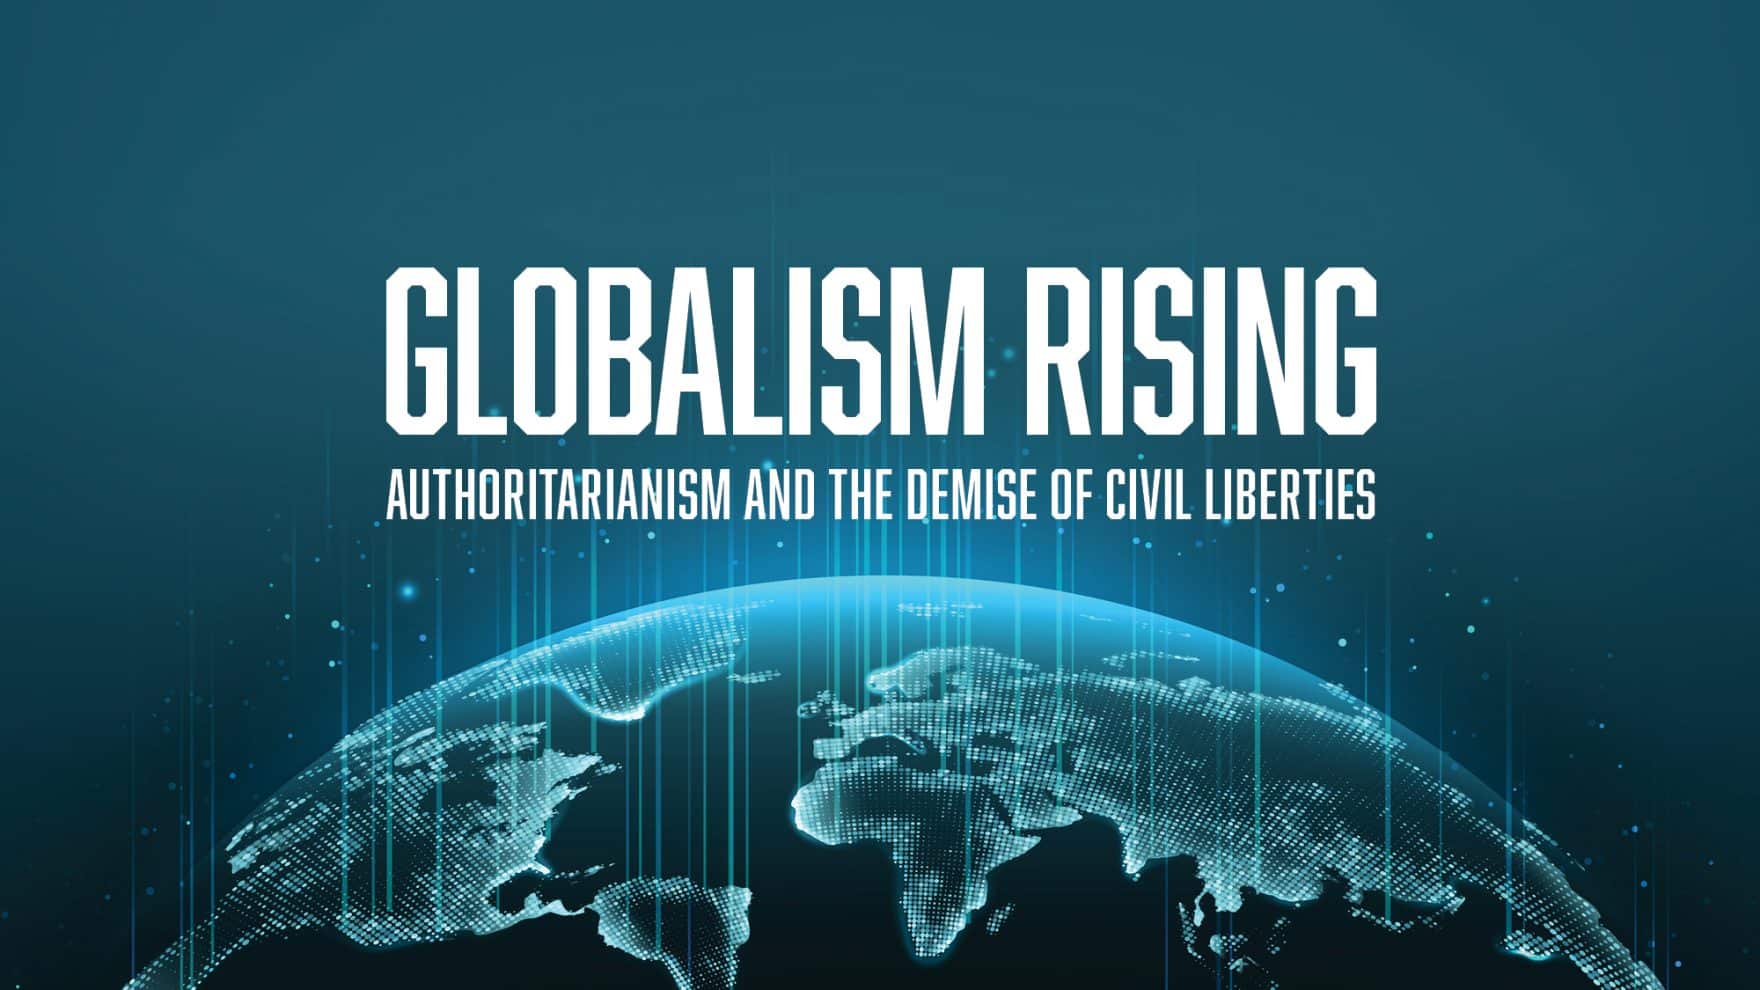 Globalism rising: Authoritarianism and the demise of civil liberties.